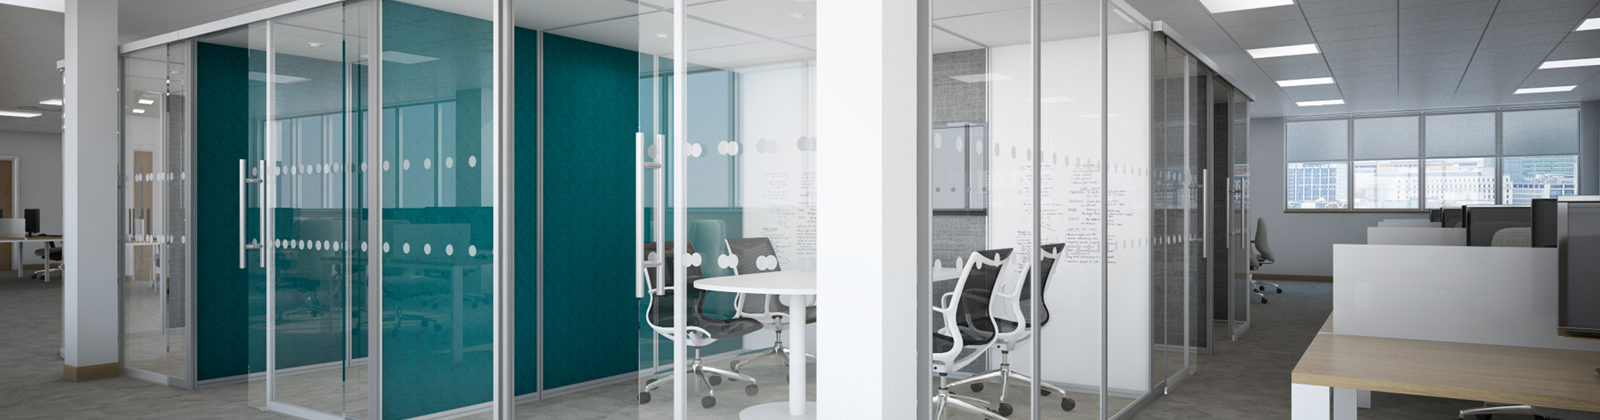 Qube Office Meeting Work Pods